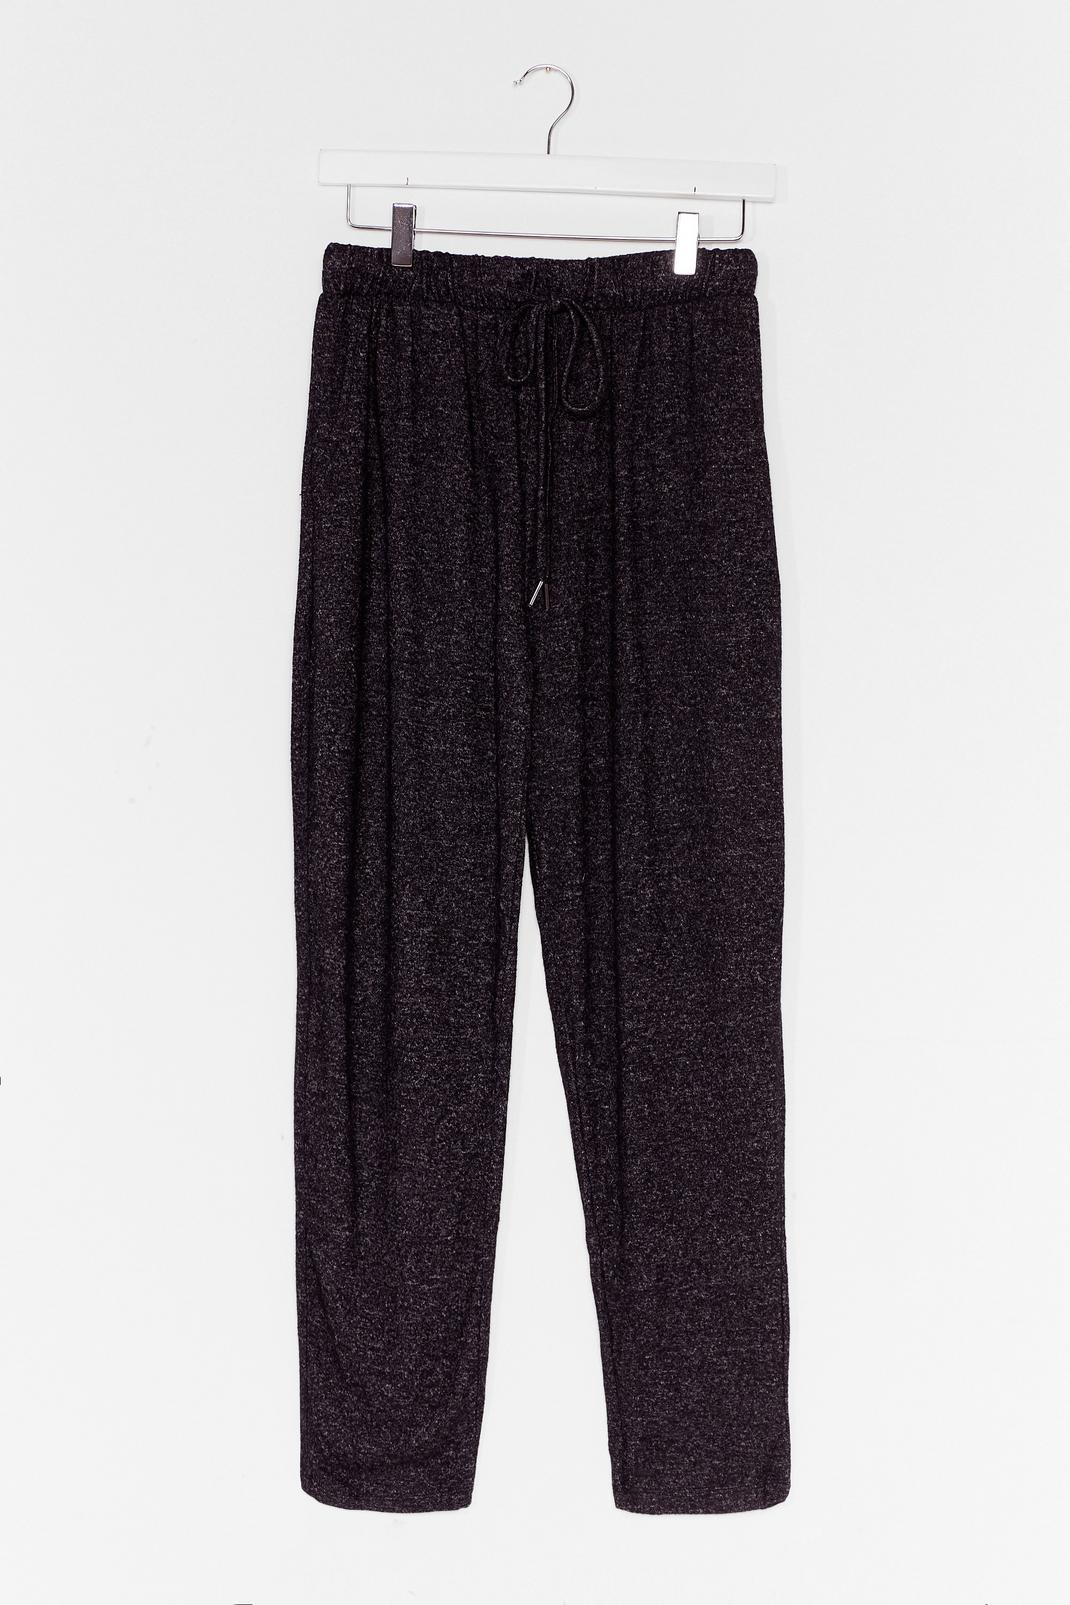 Navy Marl Slouchy Loungewear Tracksuit Pants image number 1